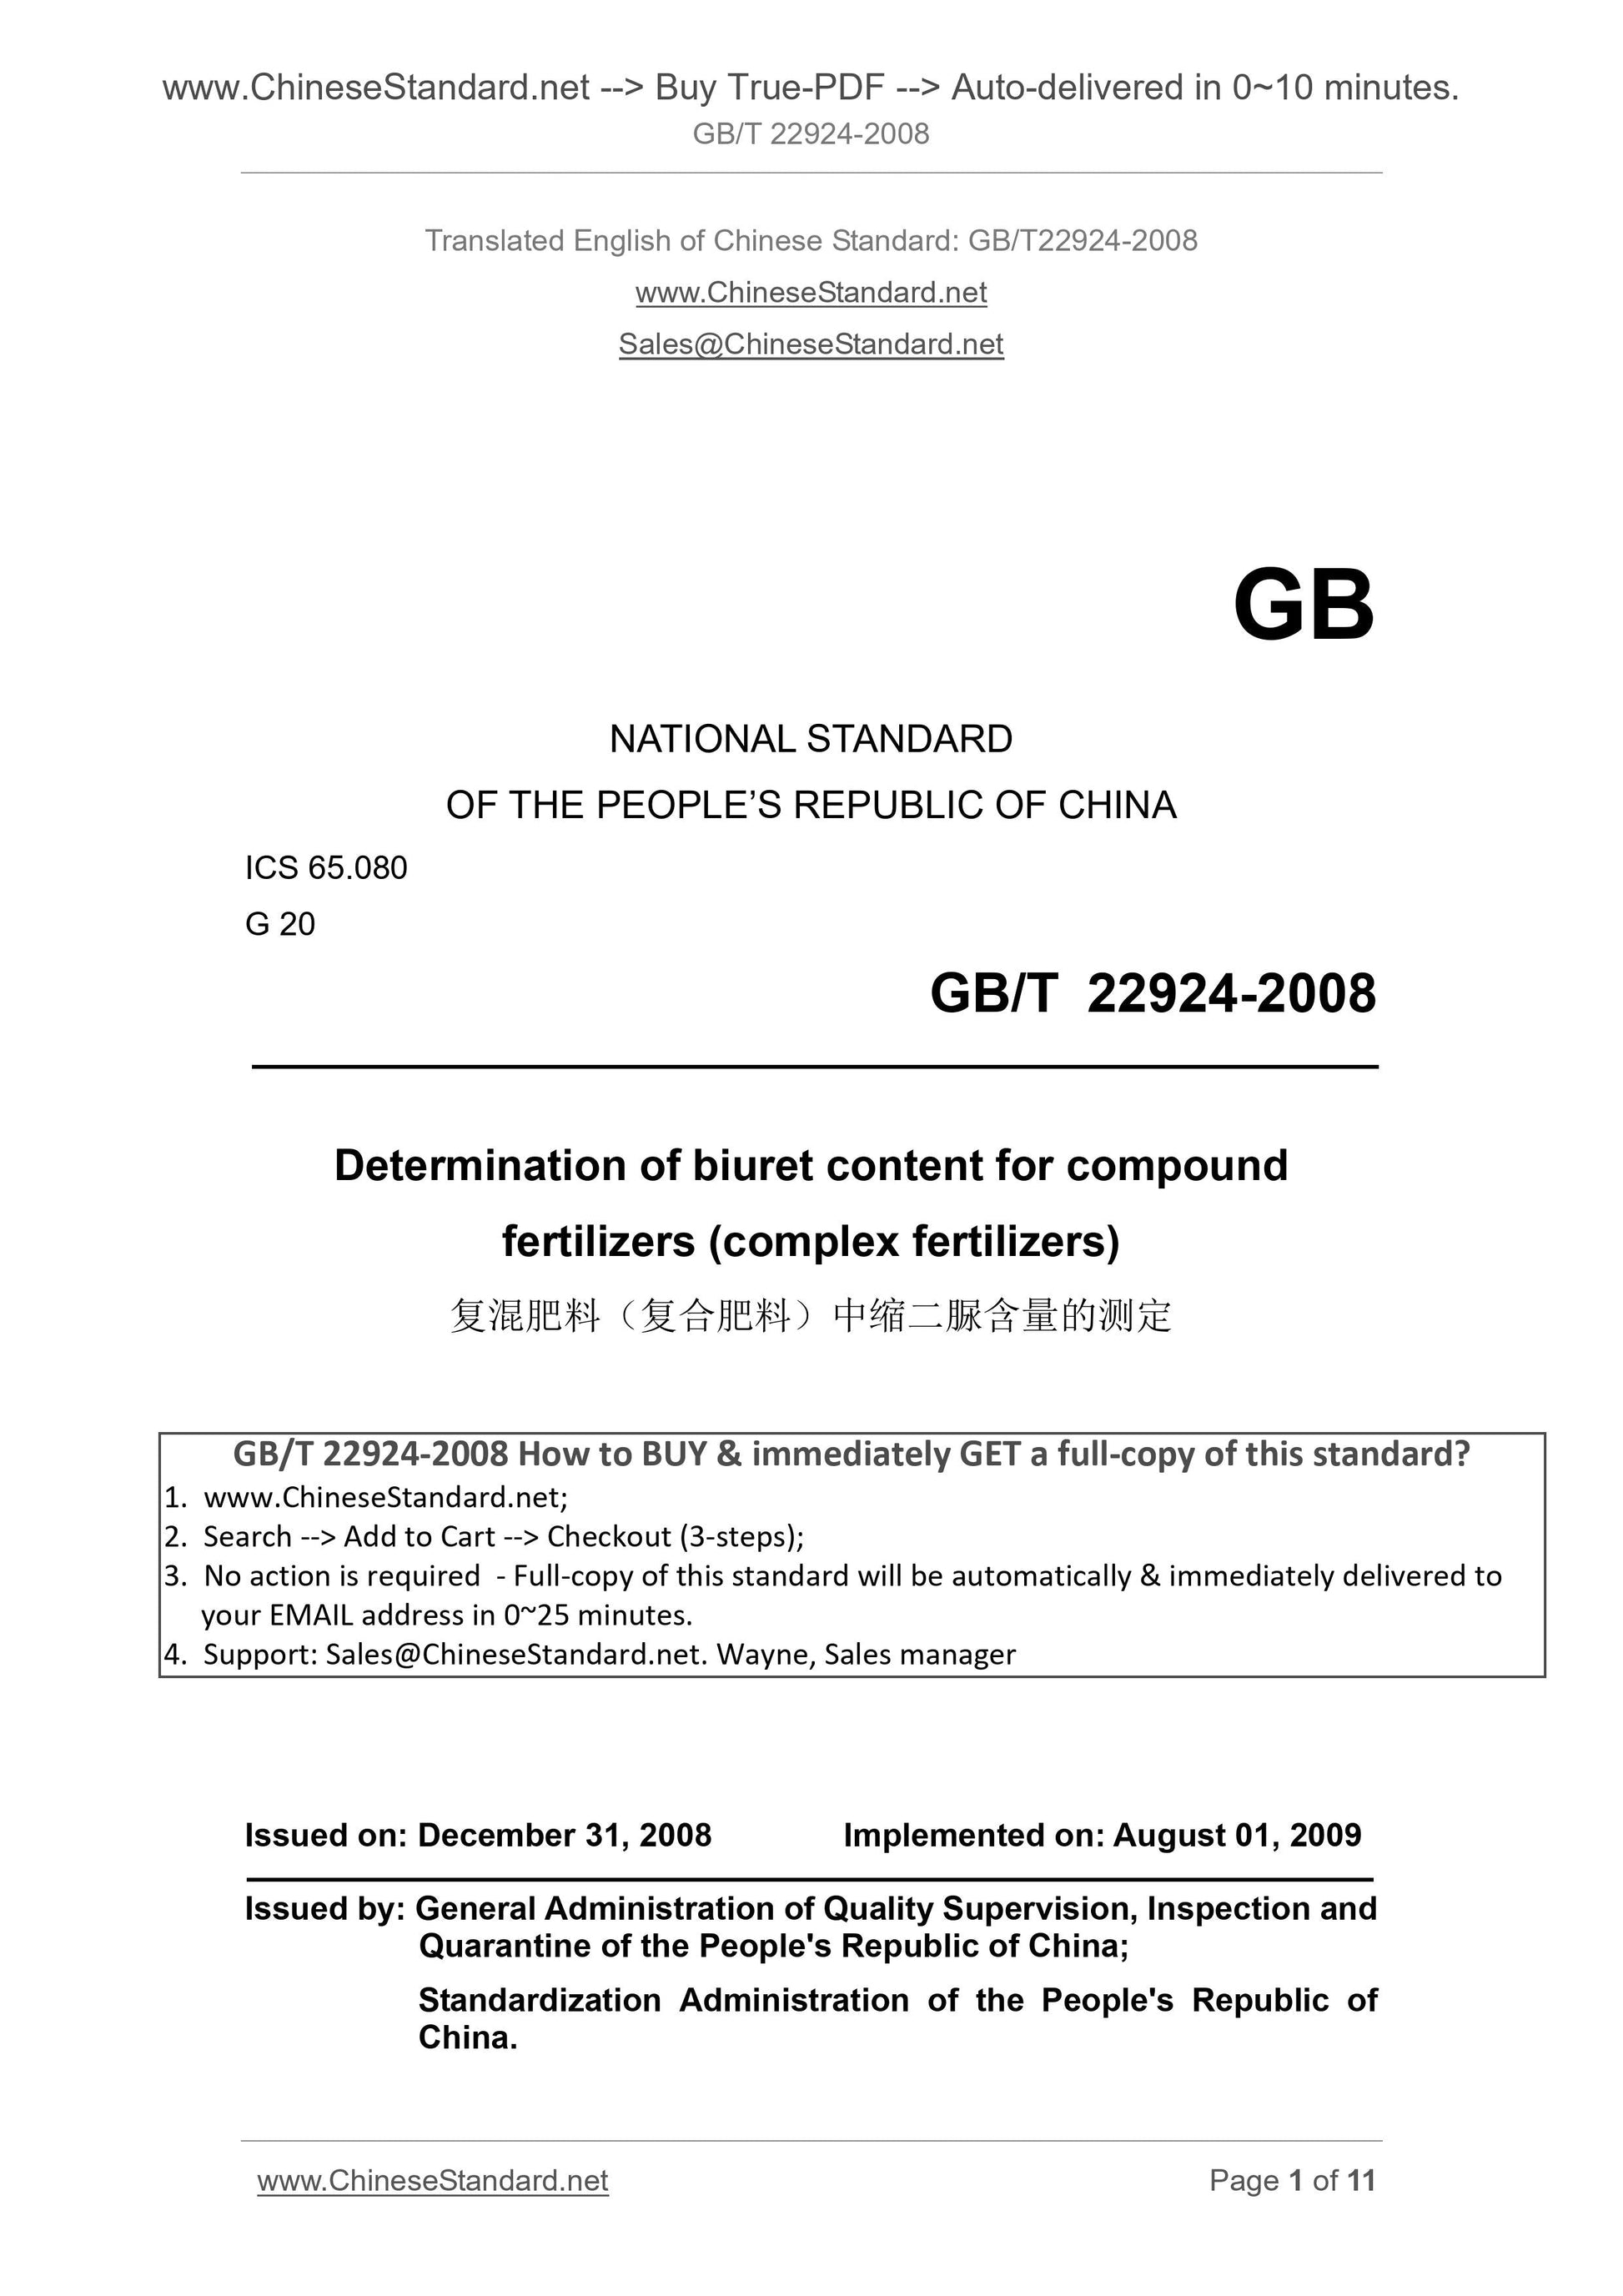 GB/T 22924-2008 Page 1